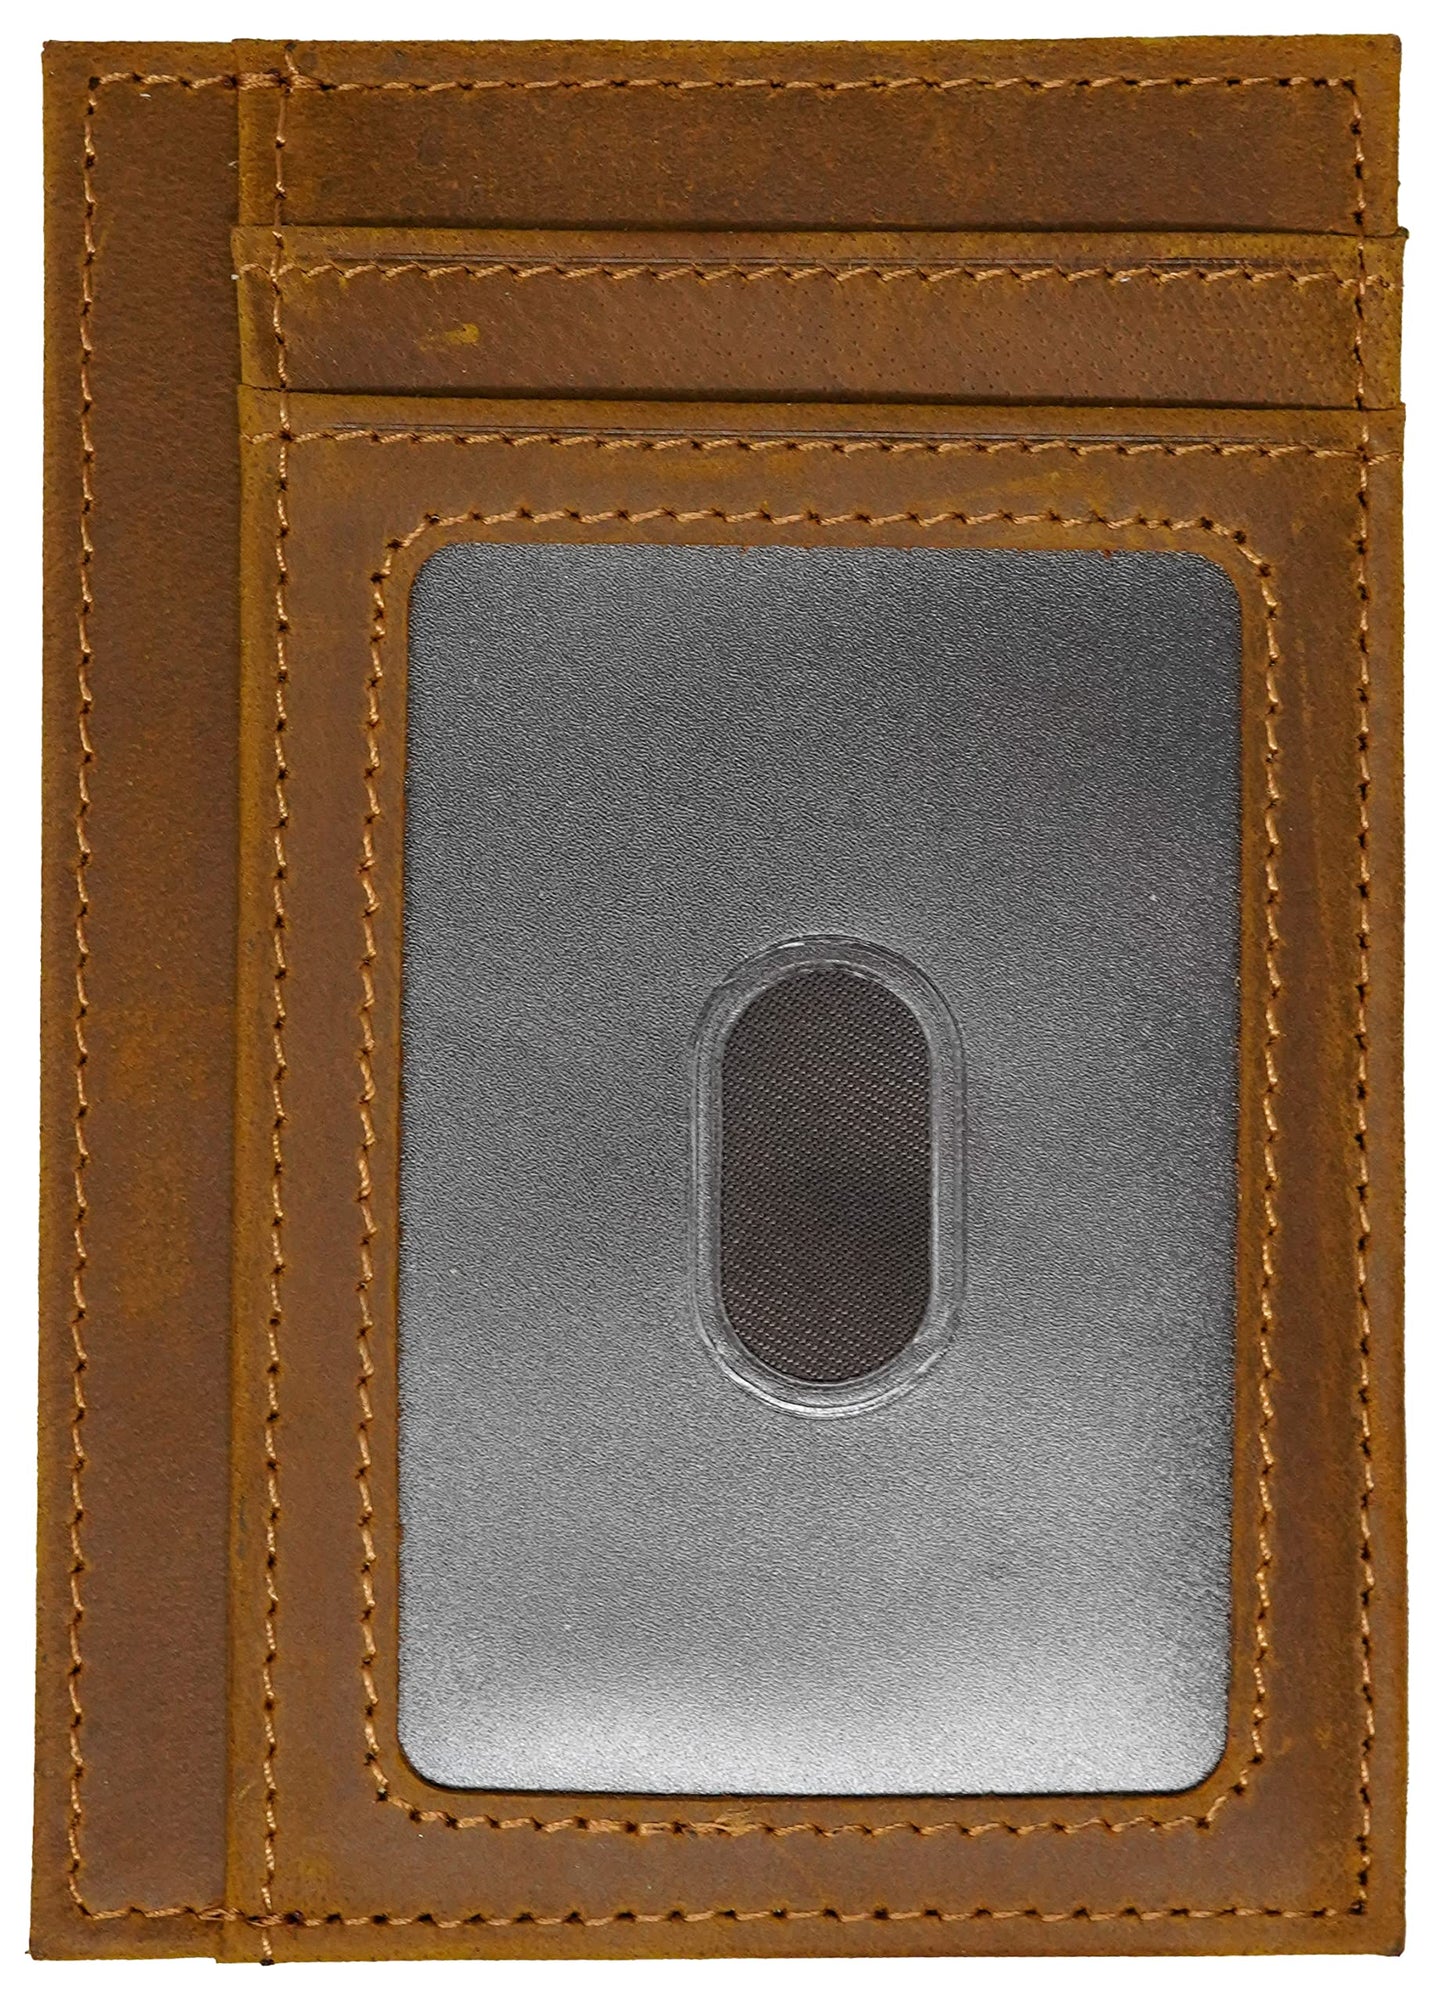 Slim Leather Card Holder by Funky Junque